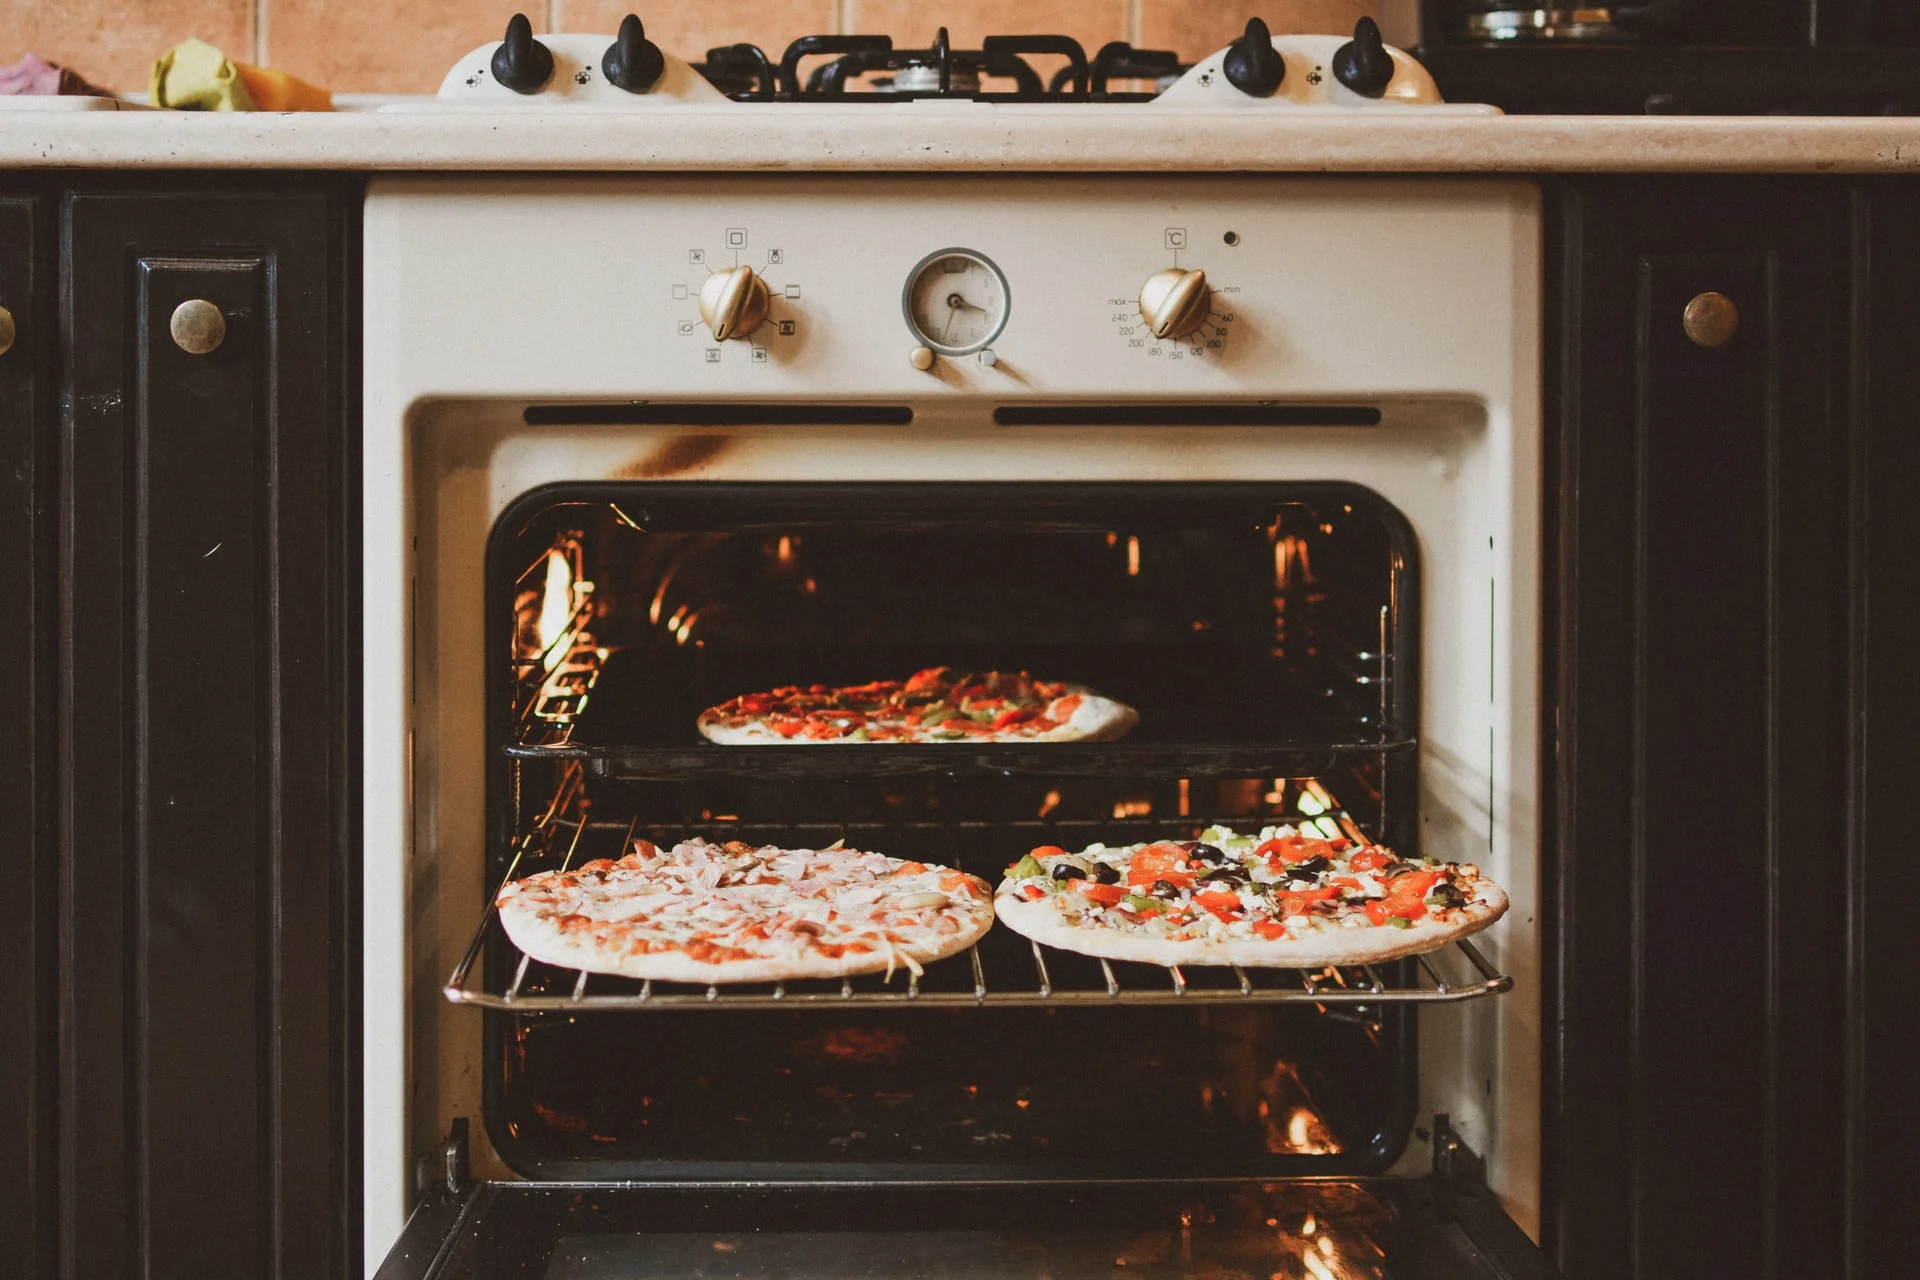 pizzas in an oven